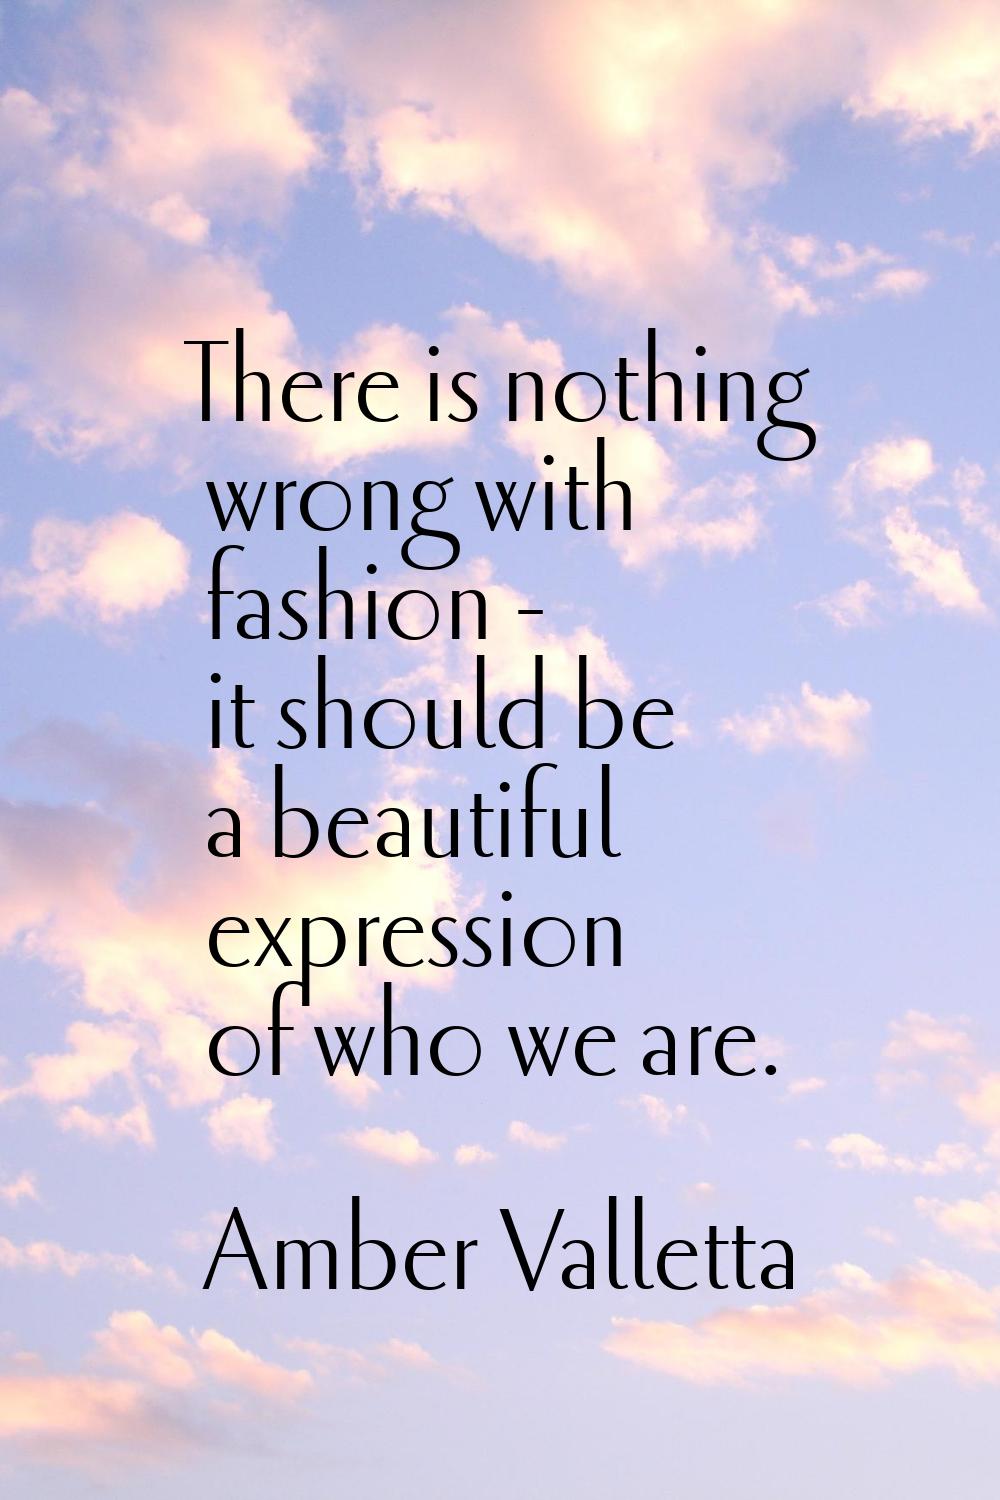 There is nothing wrong with fashion - it should be a beautiful expression of who we are.